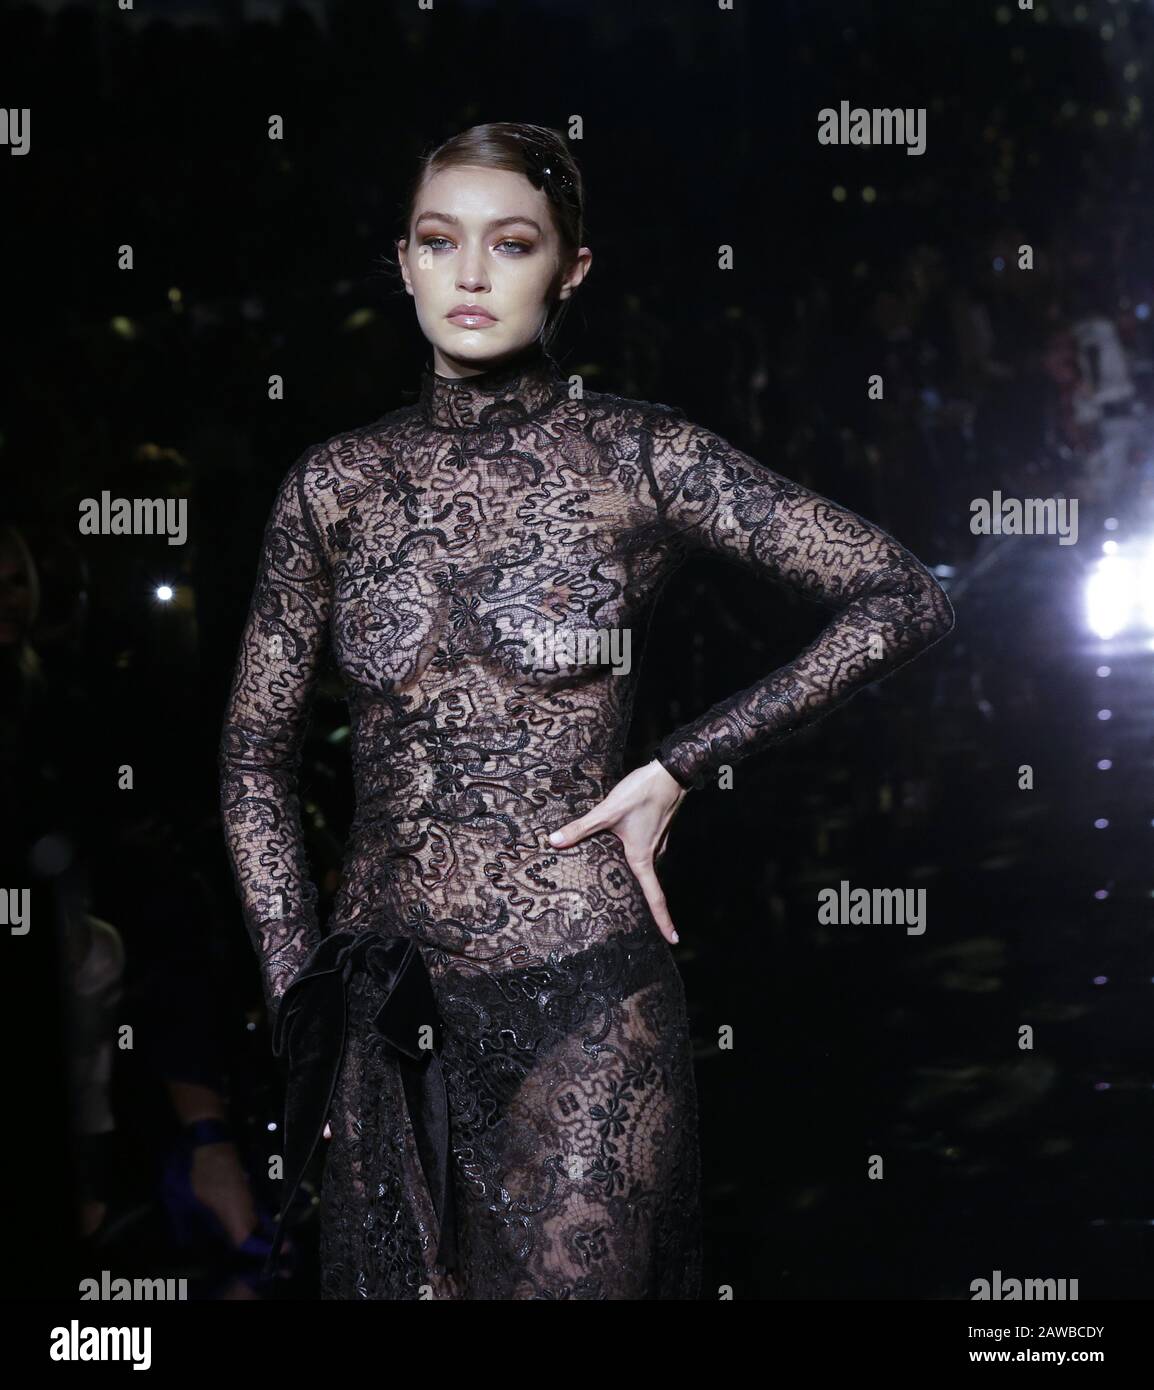 Los Angeles, United States. 07th Feb, 2020. Gigi Hadid walks on the runway at the Tom Ford AW20 Show at Milk Studios on Friday, February 07, 2020 in Hollywood, California. Photo by John Angelillo/UPI Credit: UPI/Alamy Live News Stock Photo